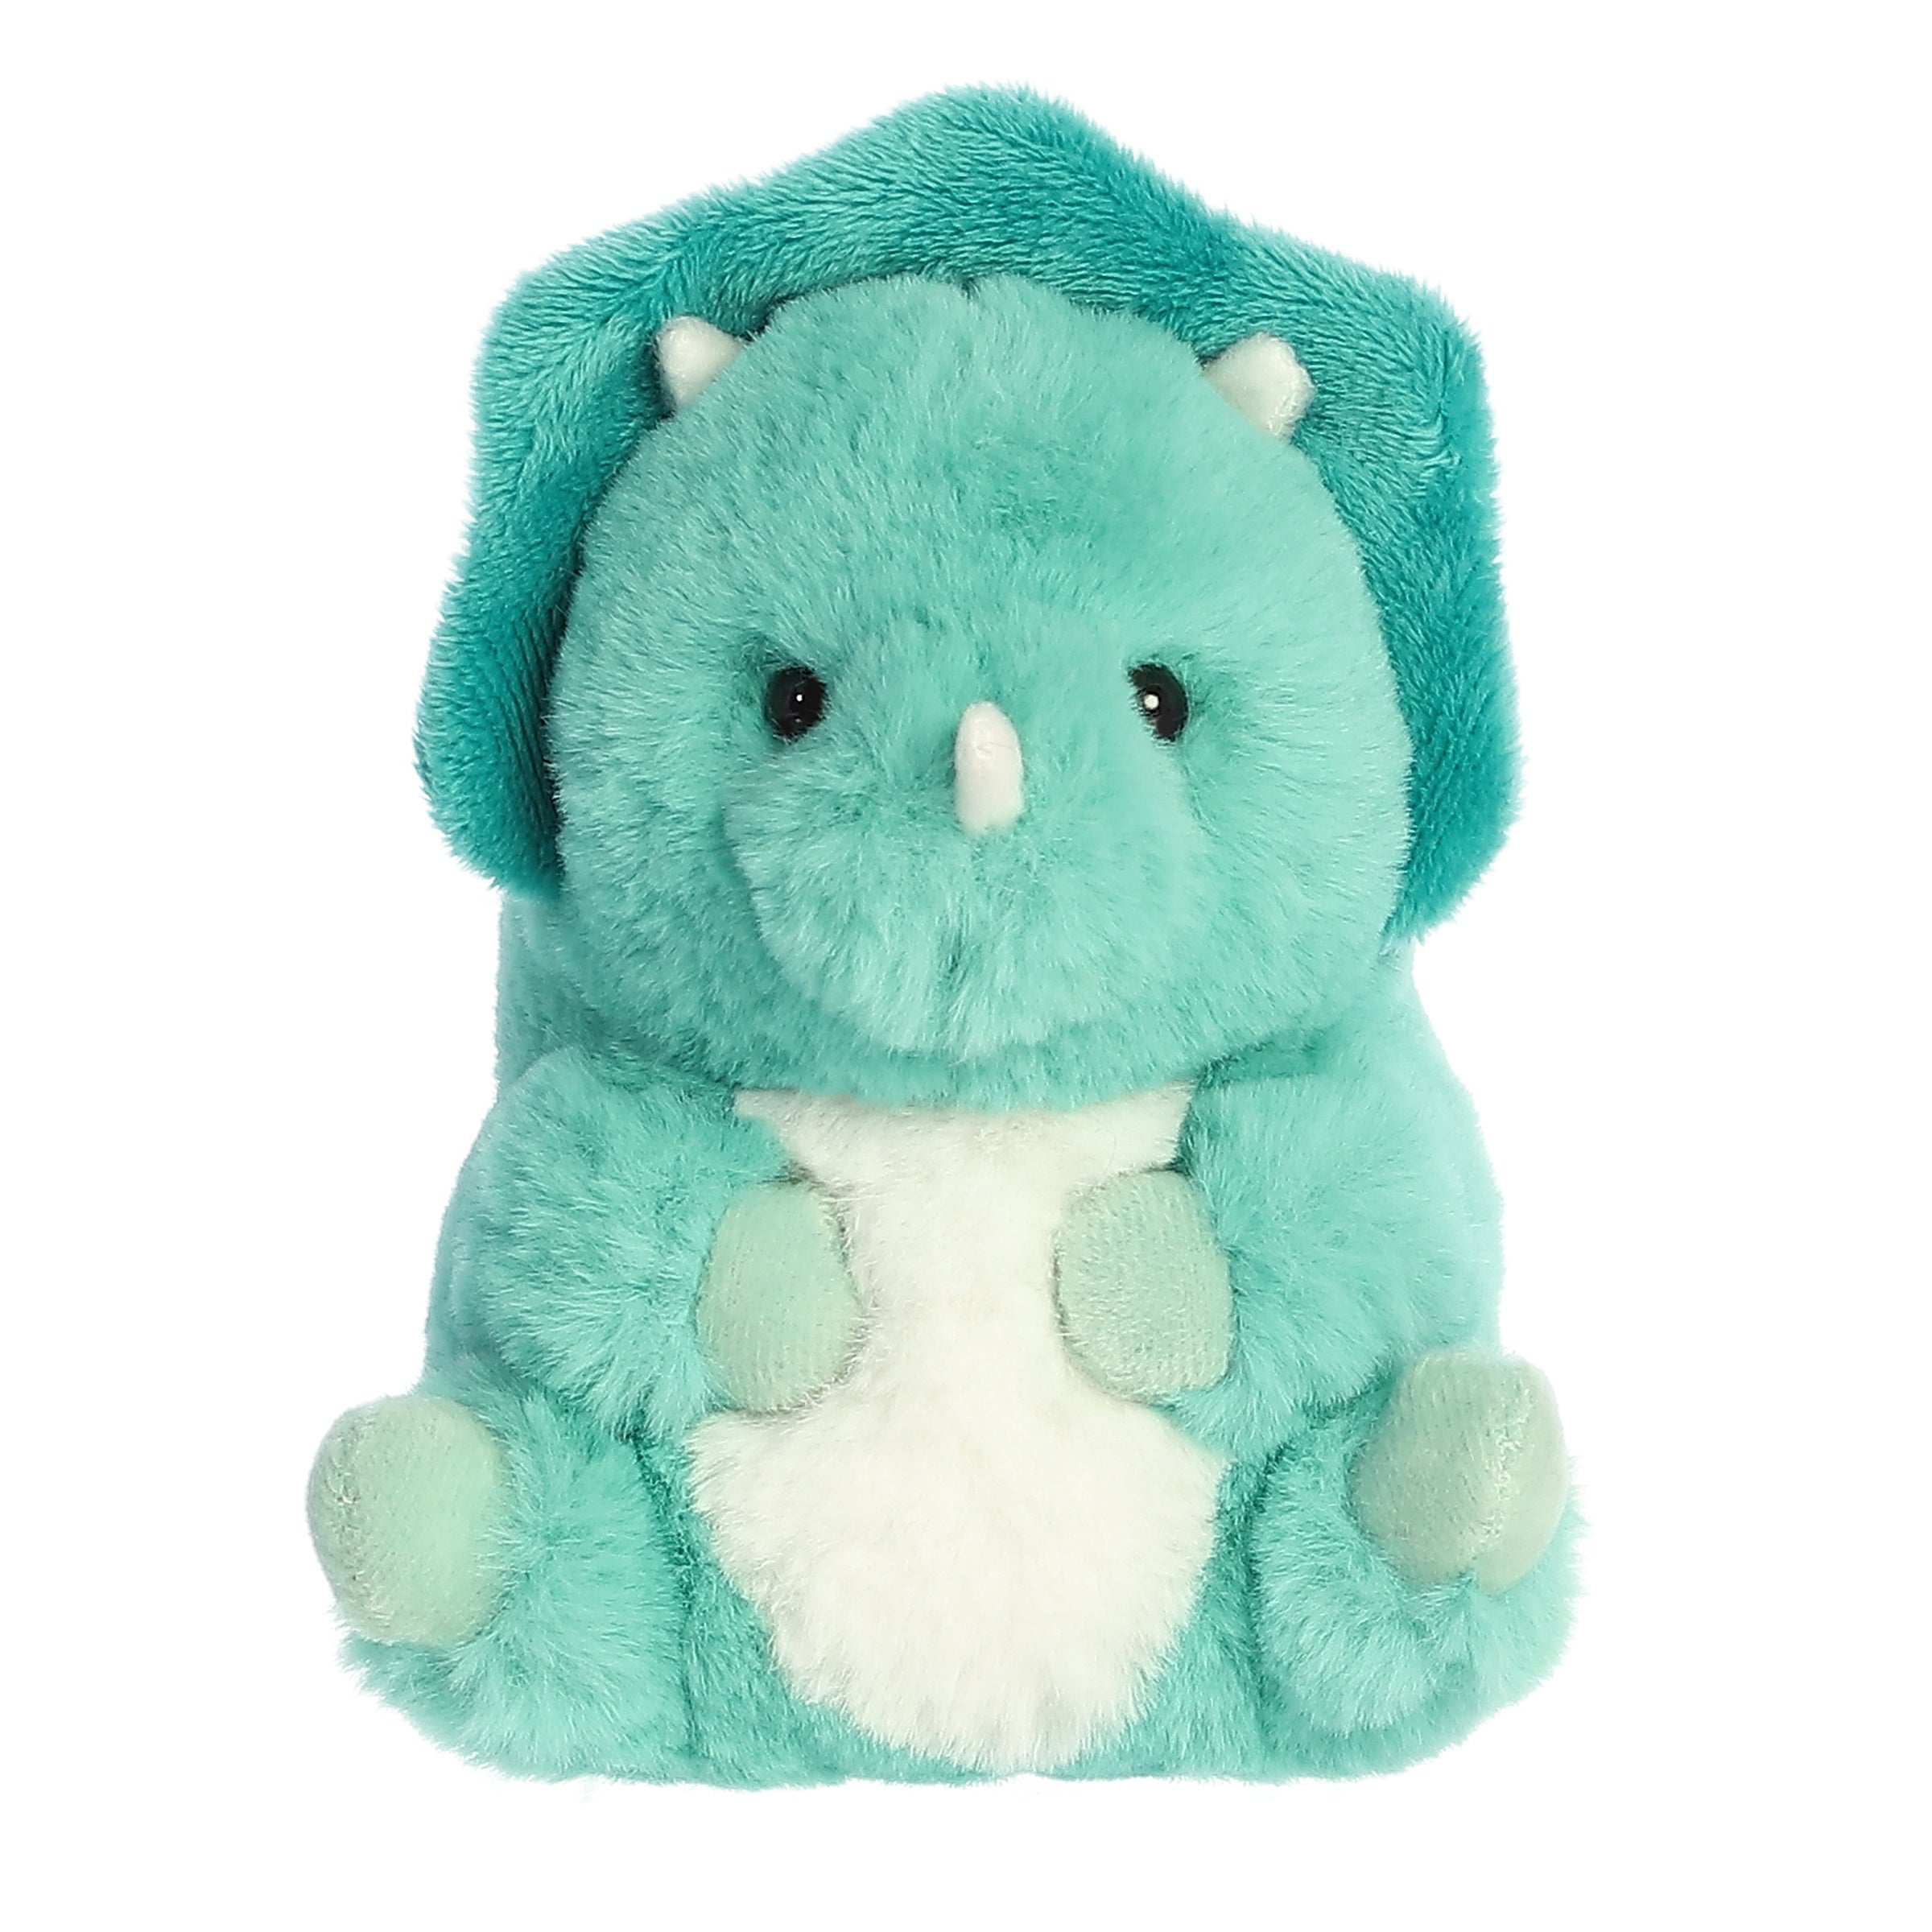 Triceratops plush in a vibrant mineral green with a white belly, sitting playfully on its back, with arms tucked and legs up